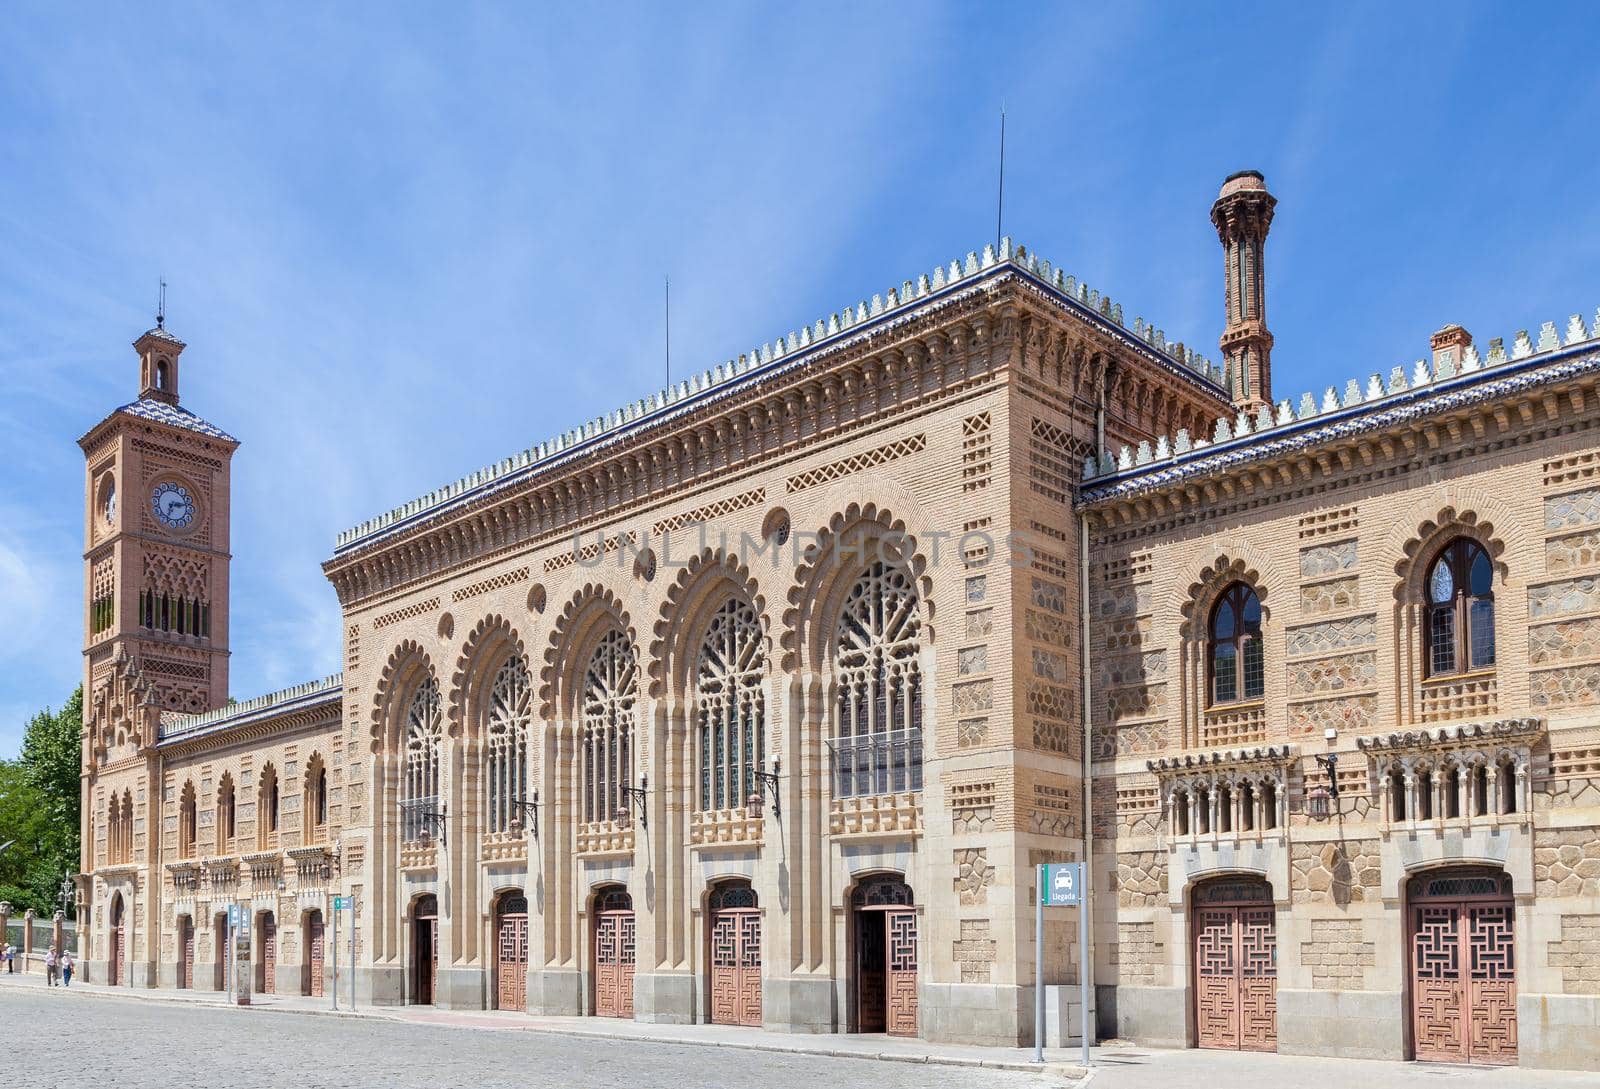 View of the railway station in Toledo, Spain